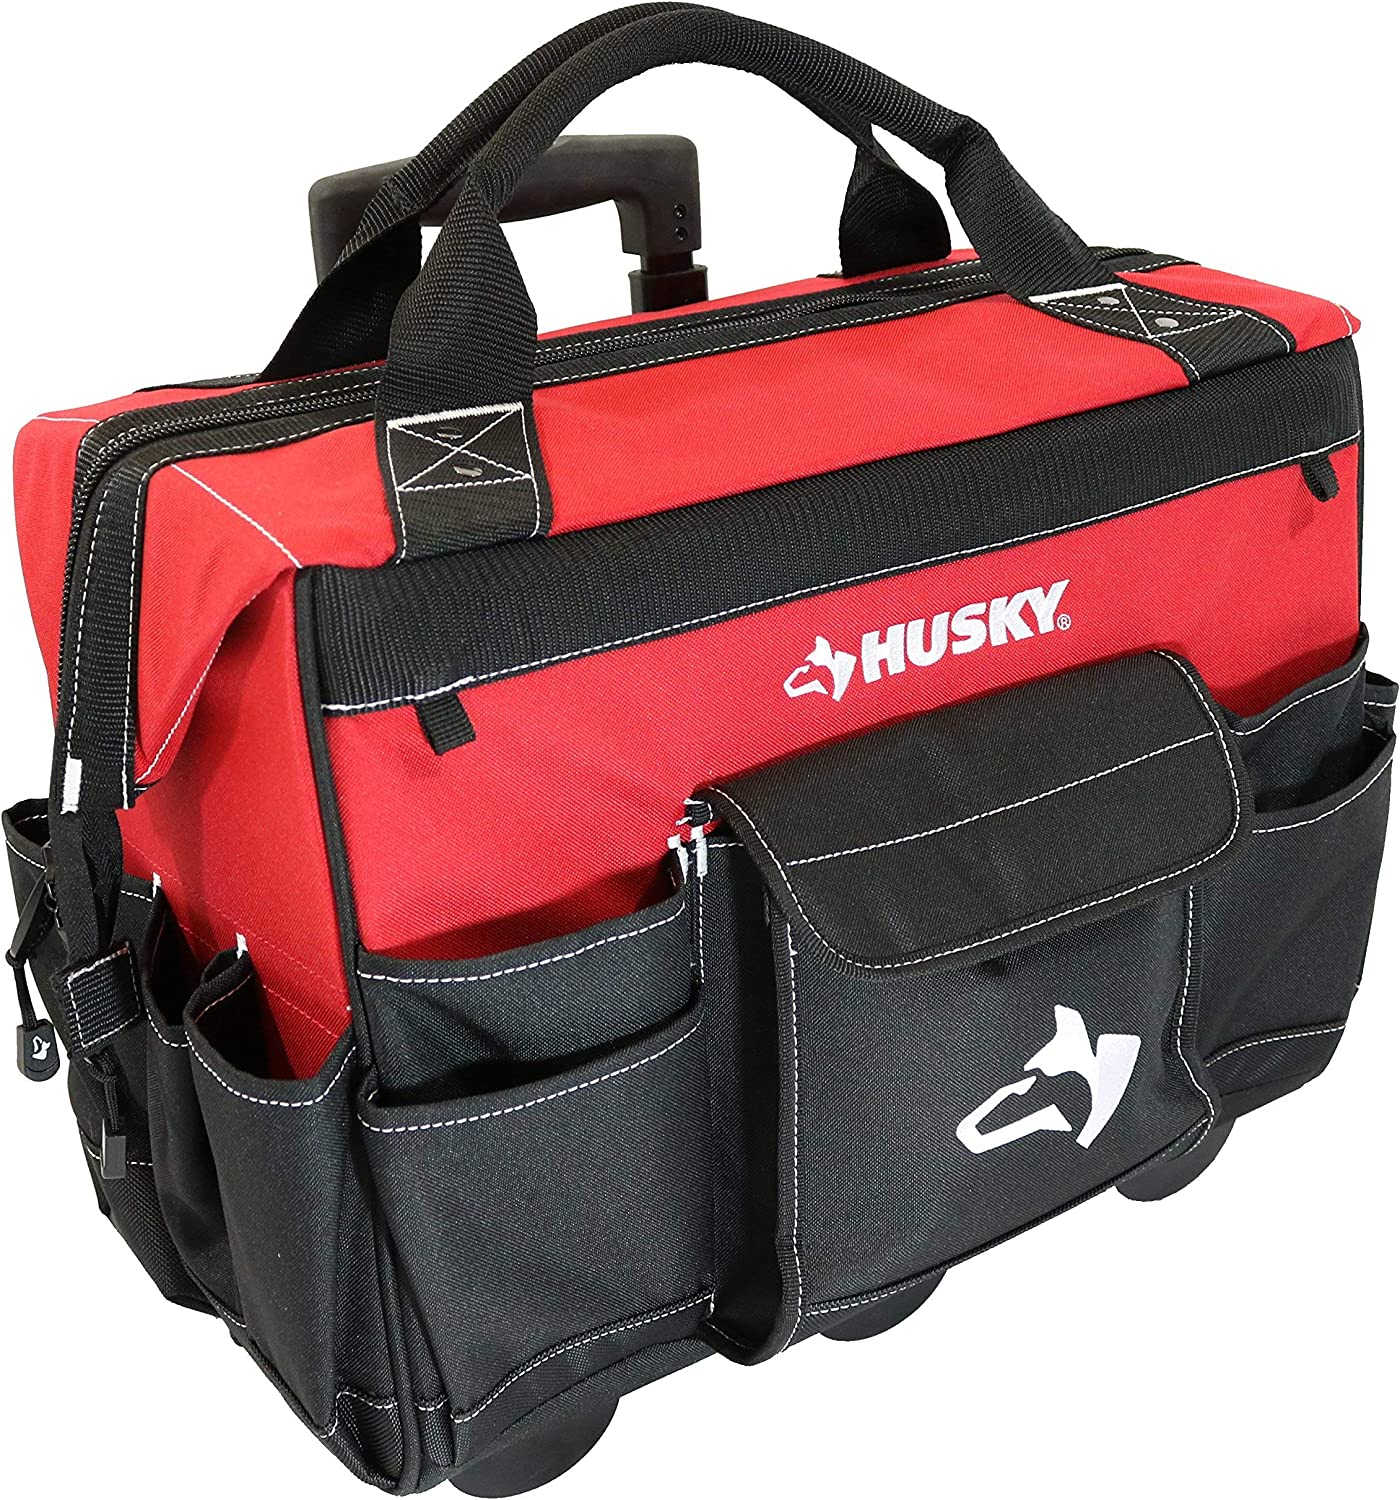 Husky GP-43196N13 18" Water Resistant Contractor's Rolling Tool Tote Bag with Telescoping Handle